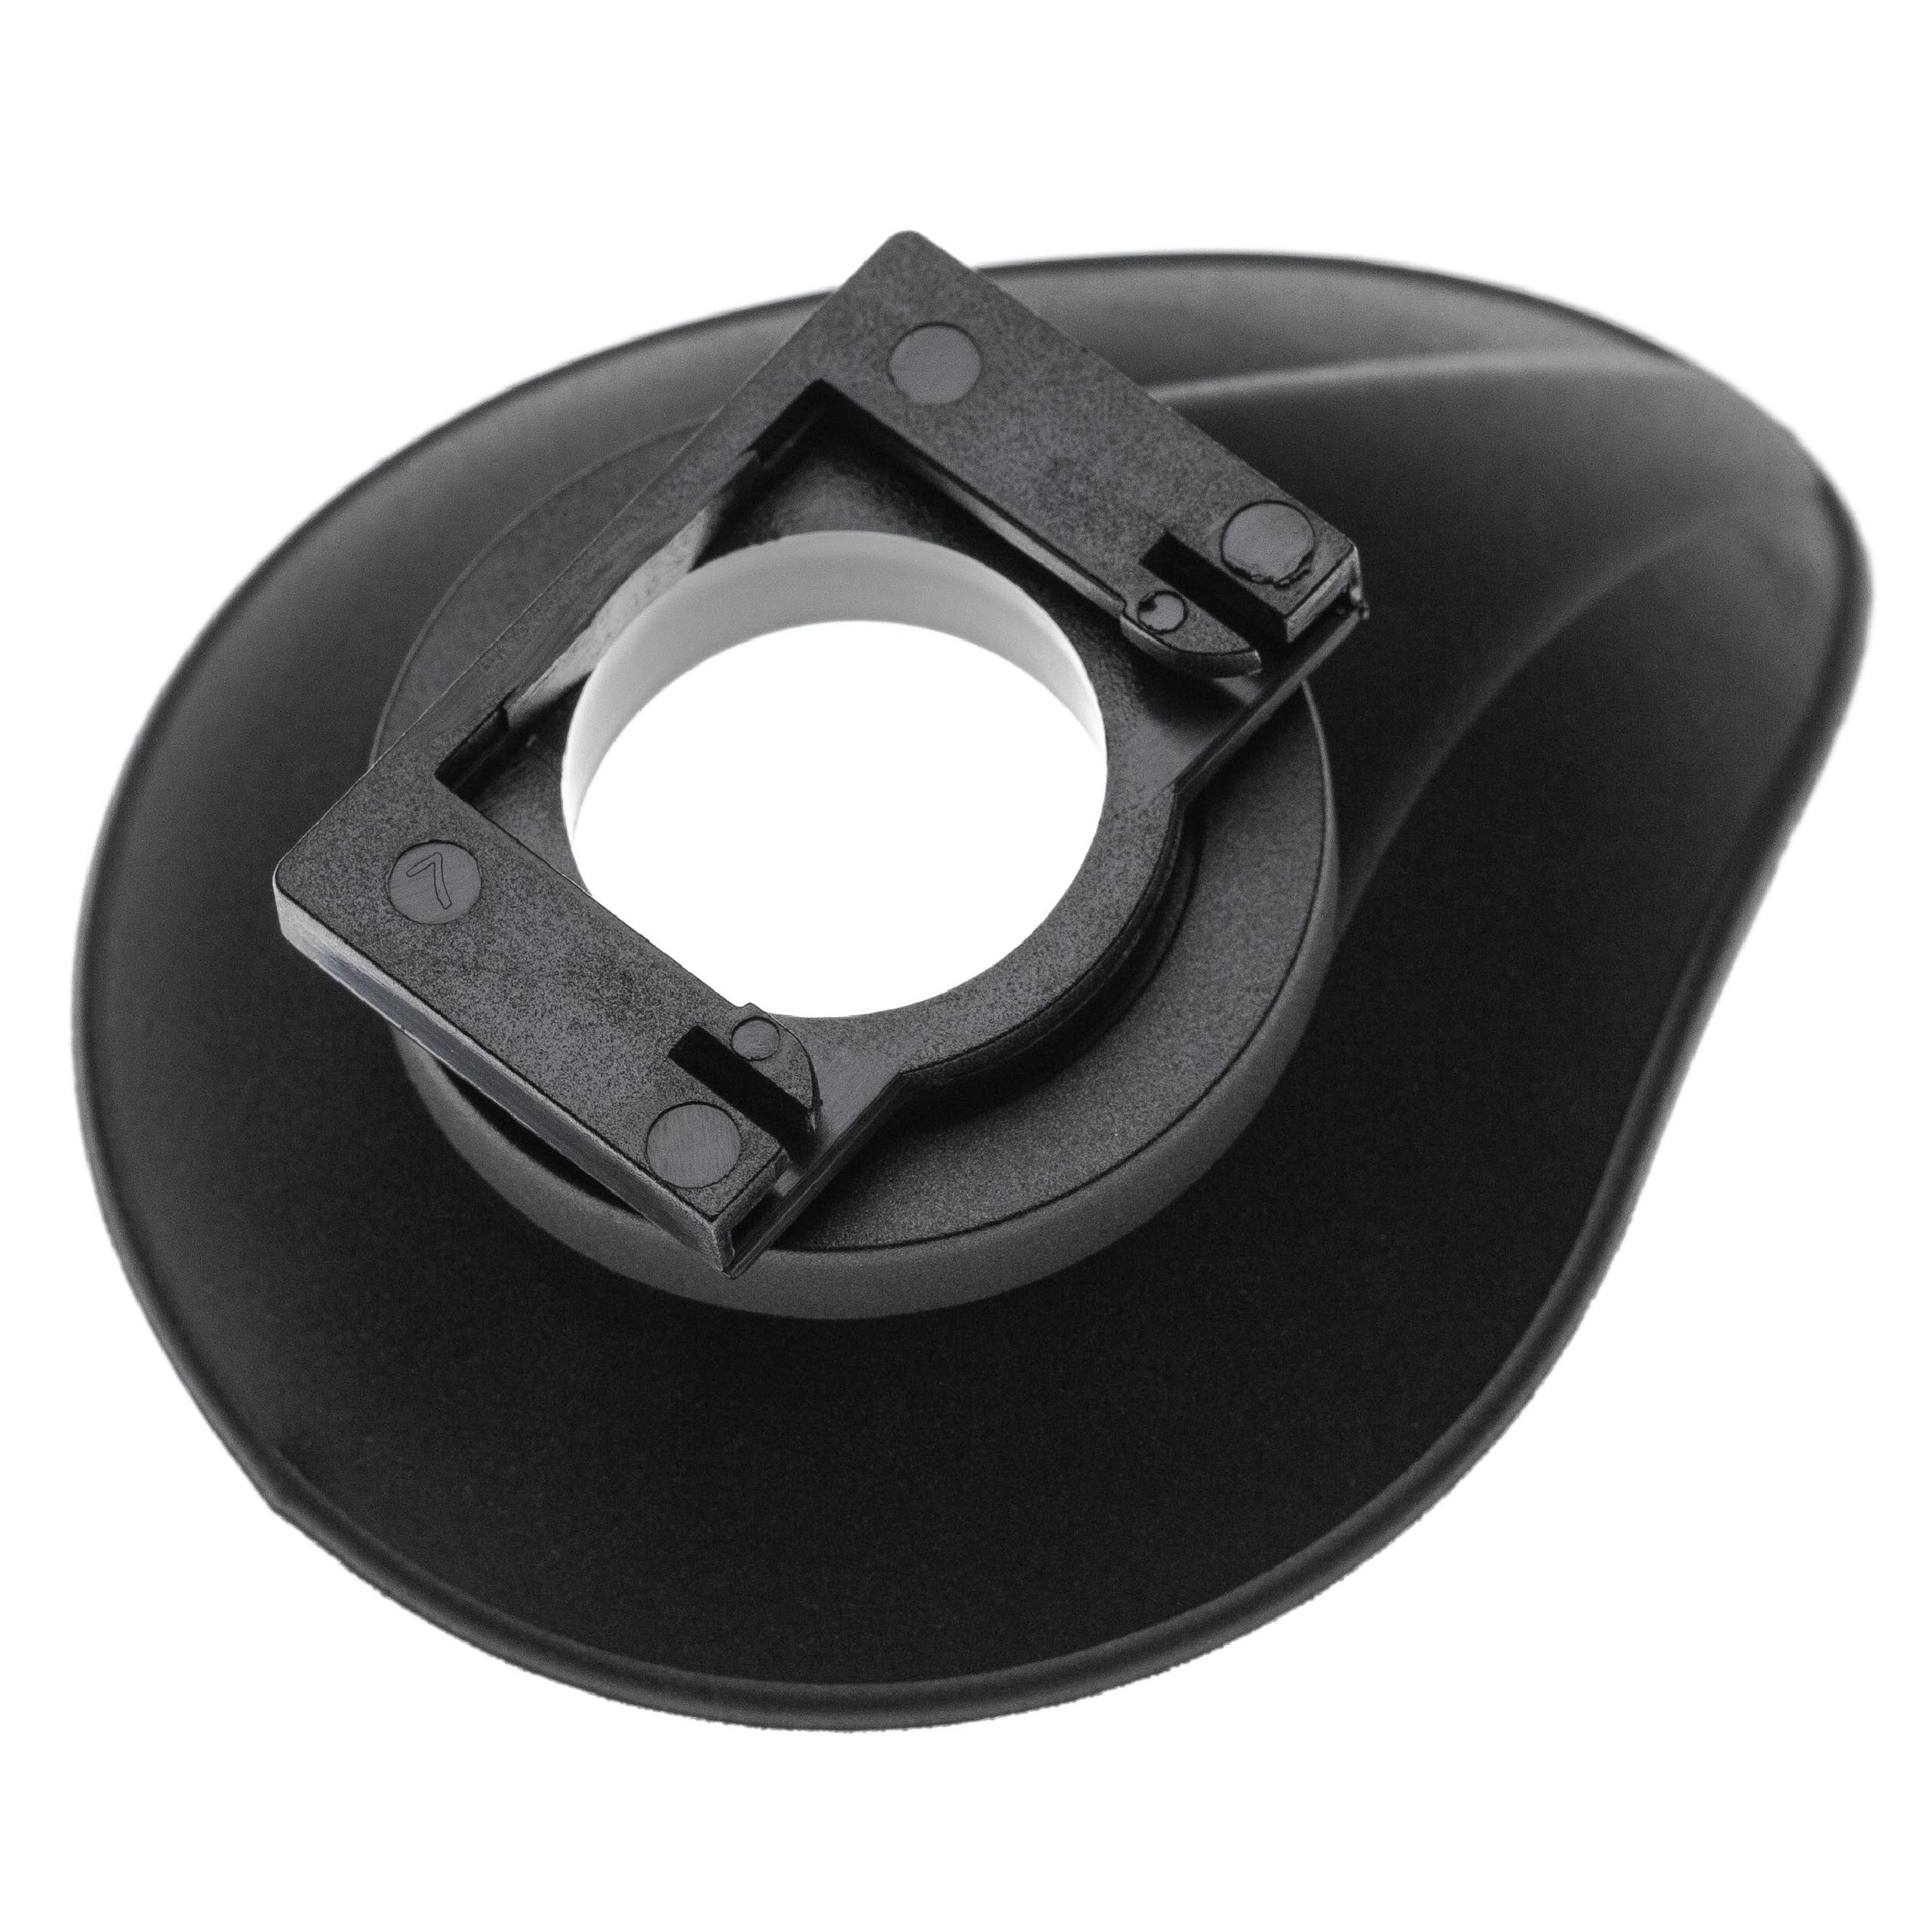 Eye Cup replaces Canon EF, EB for Canon 450D etc., Plastic, Rubber